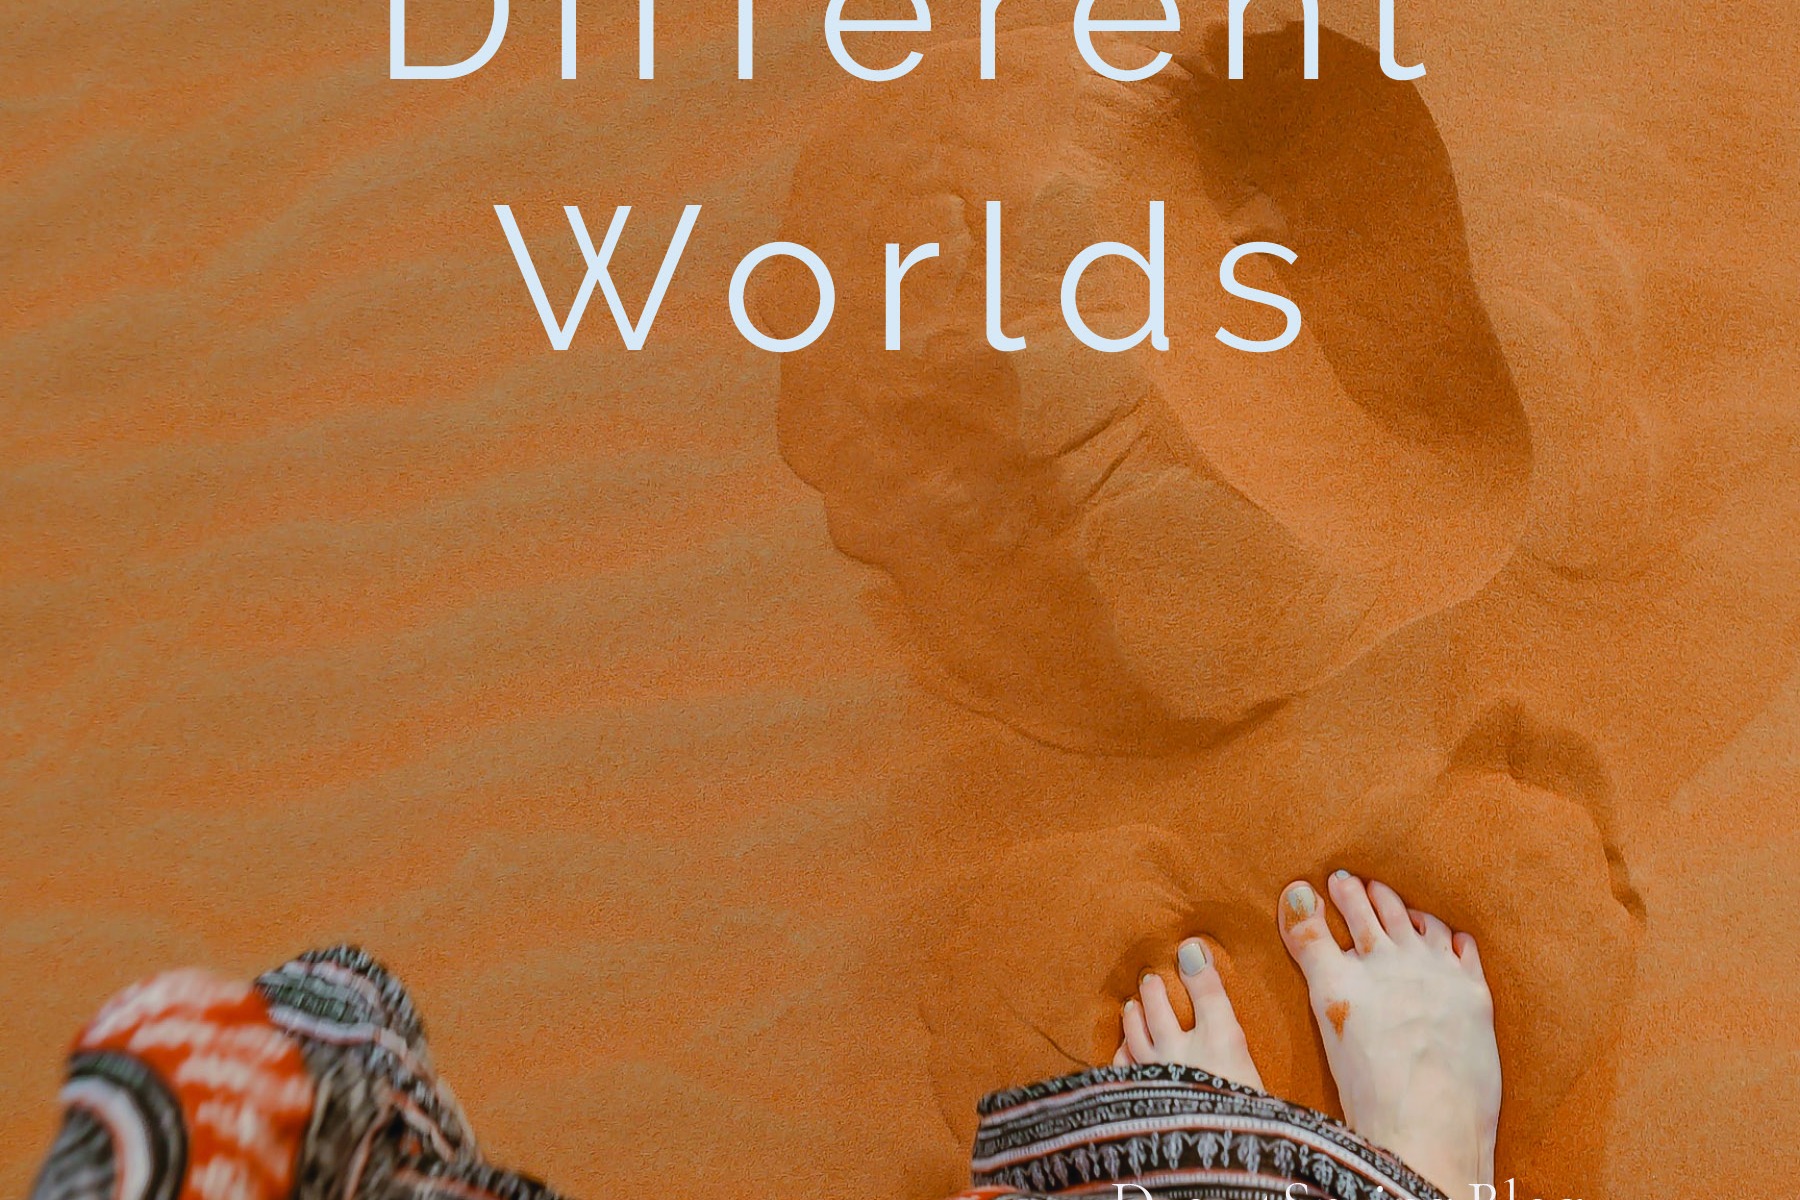 Different Worlds is a blog post from Janet Lenz from Desertsprings blog